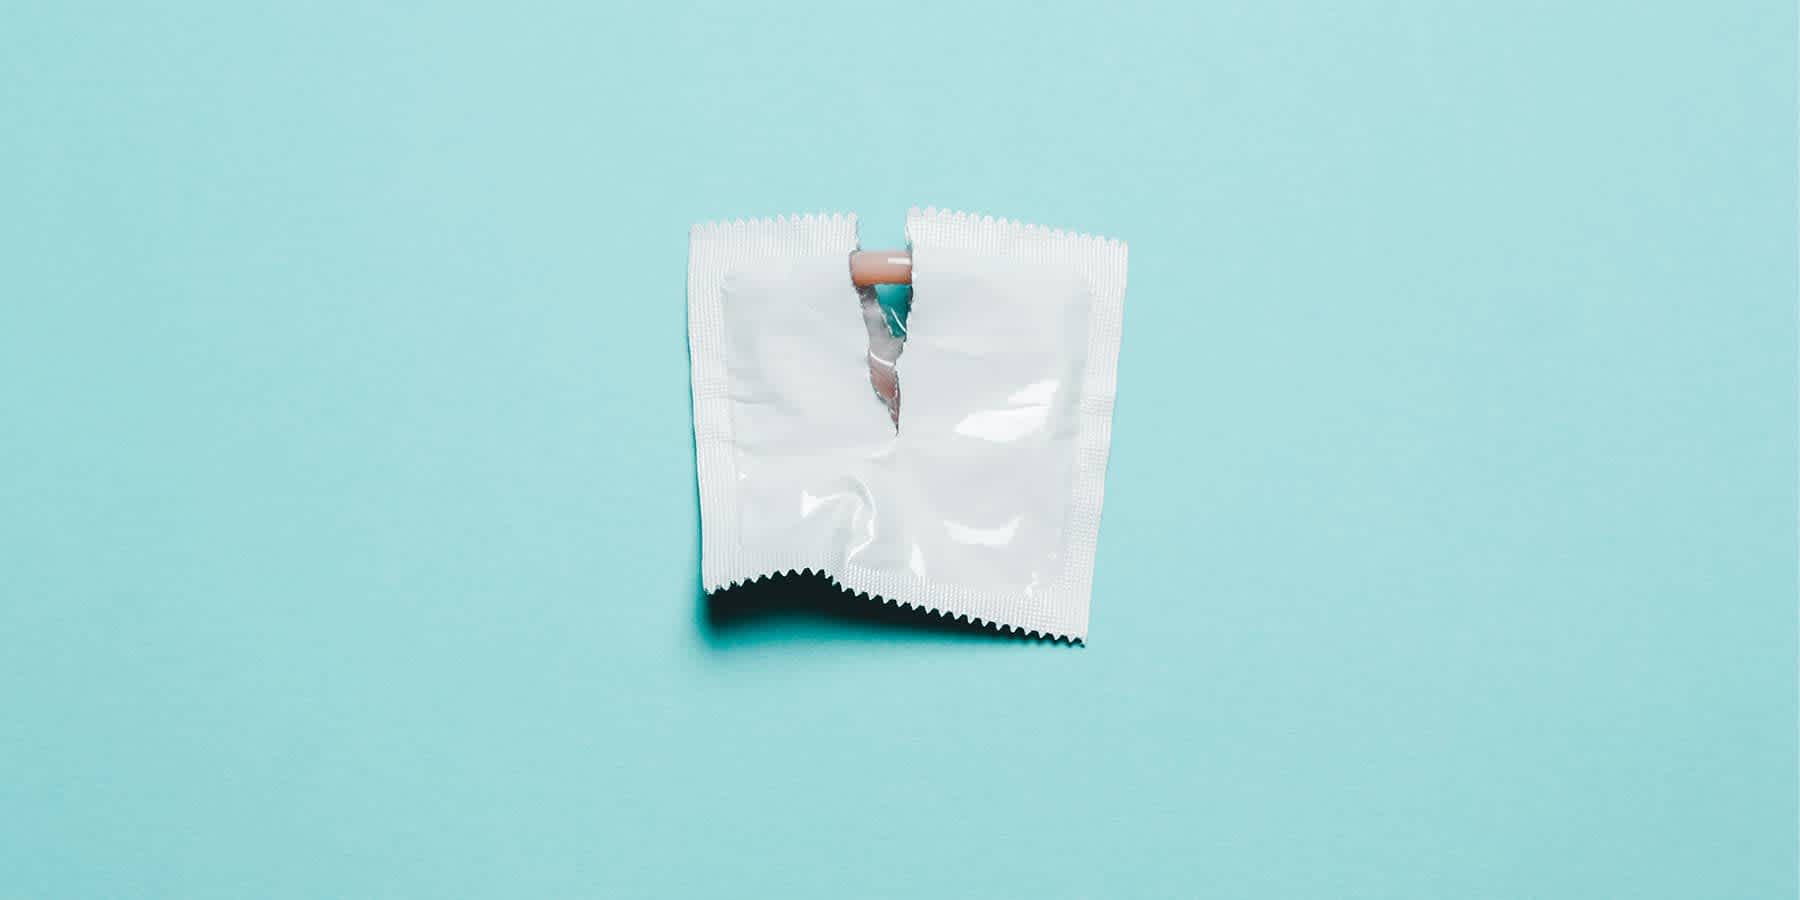 Opened condom packet against light blue background to represent condom usage to prevent STD transmission through oral sex